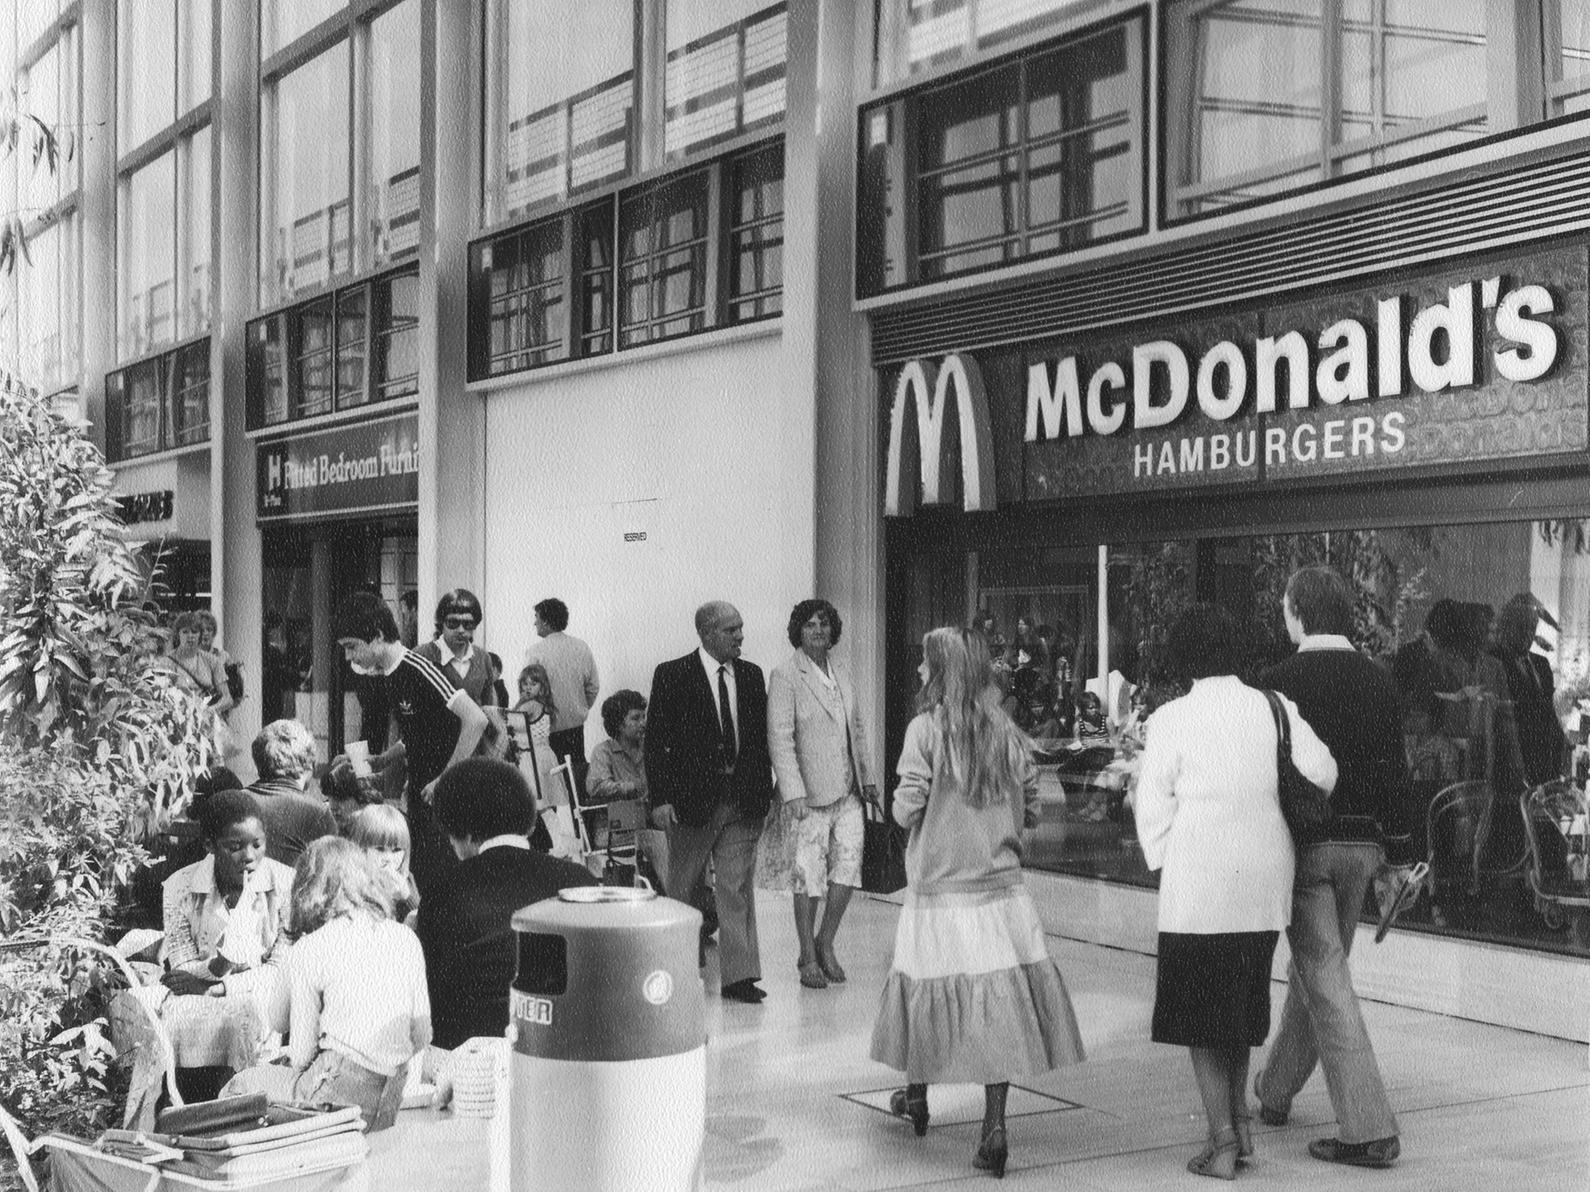 McDonald's in Central Milton Keynes Shopping Centre at Midsummer Arcade on the 16th of September 1979 by Ivor Leonard. Check out the cool clothes, what is now retro buggy and the word 'Hamburgers' in the sign